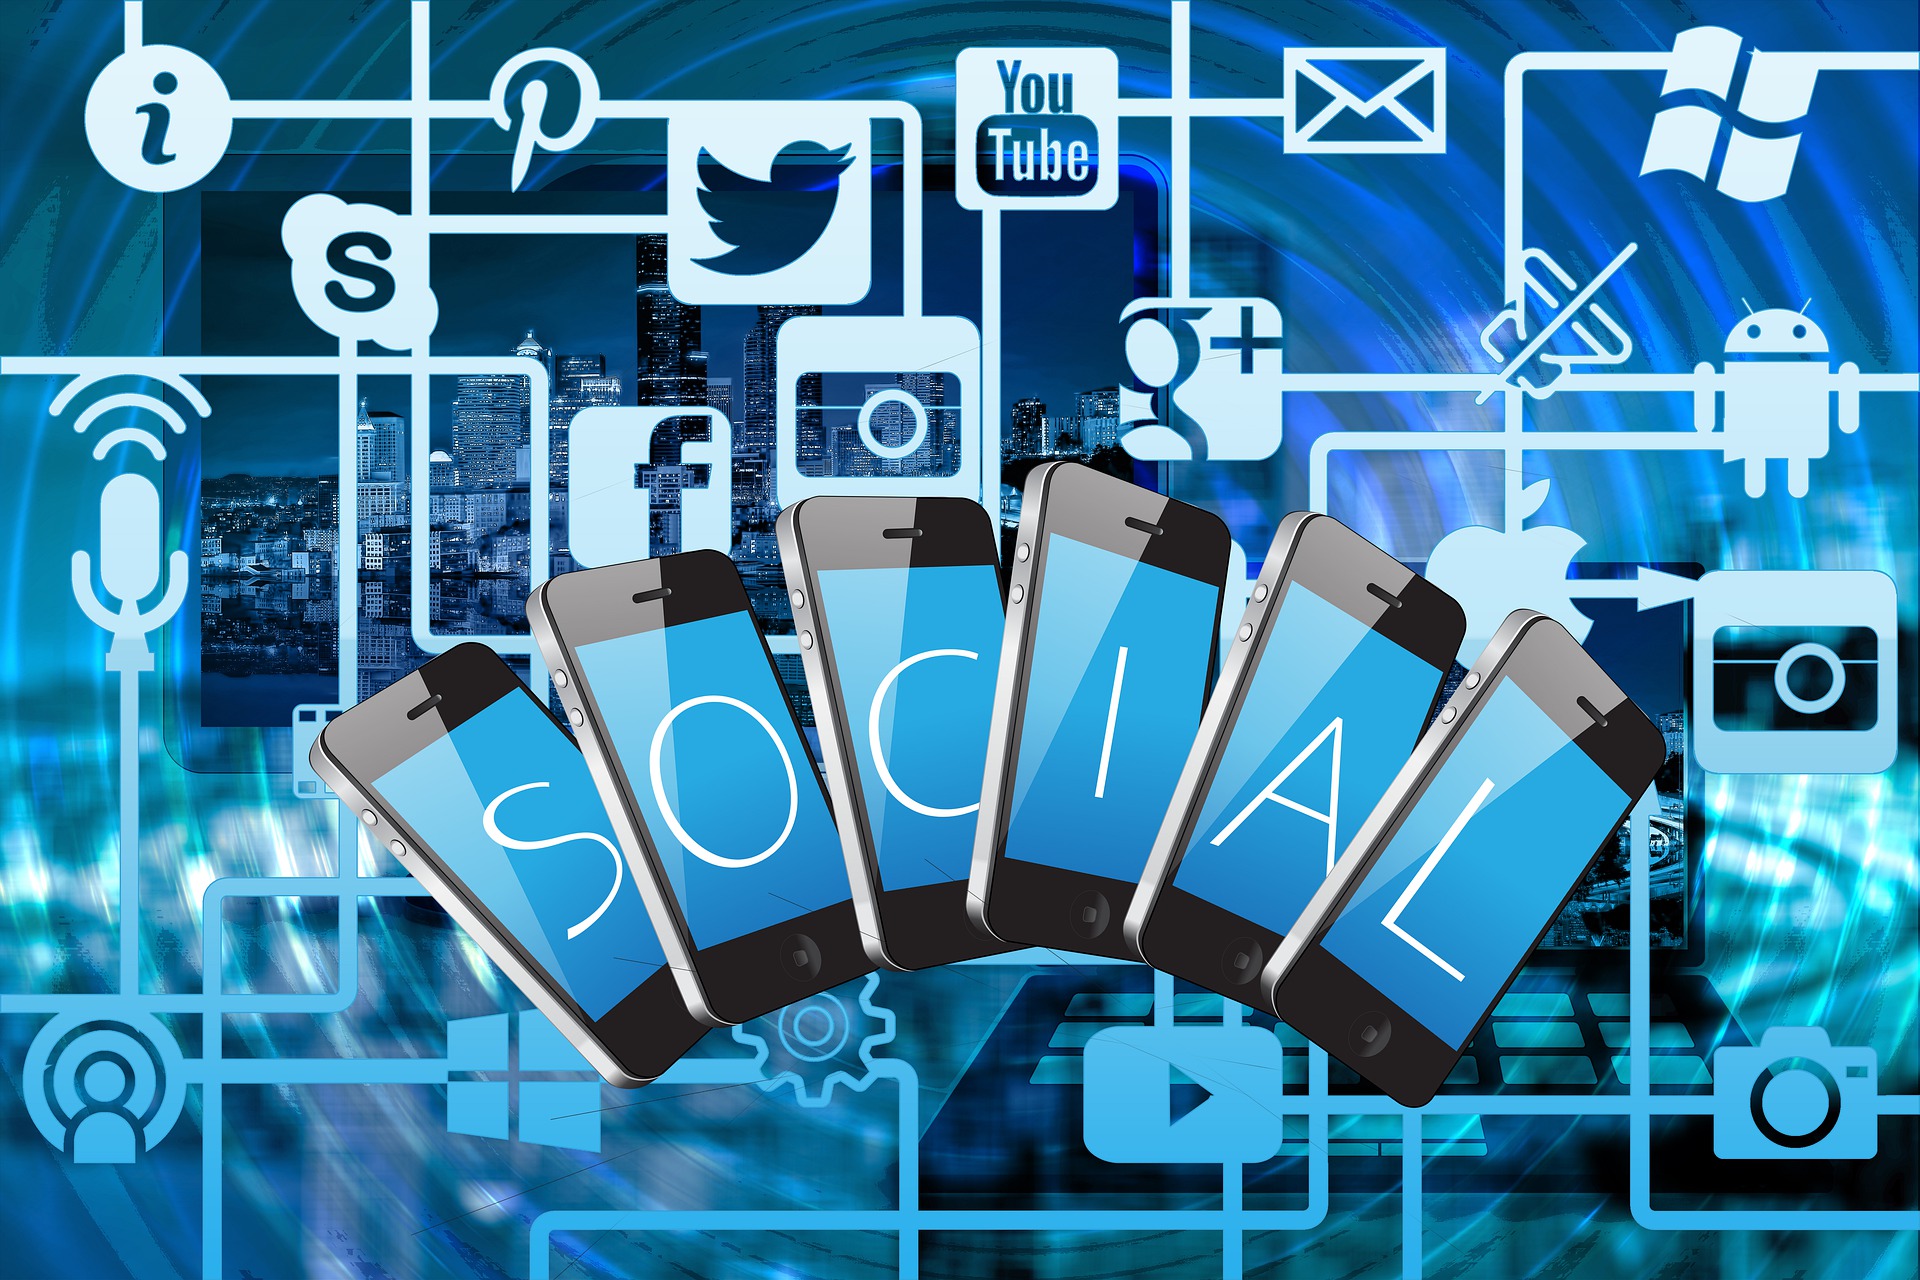 How to Find Social Media Marketing Jobs Easily